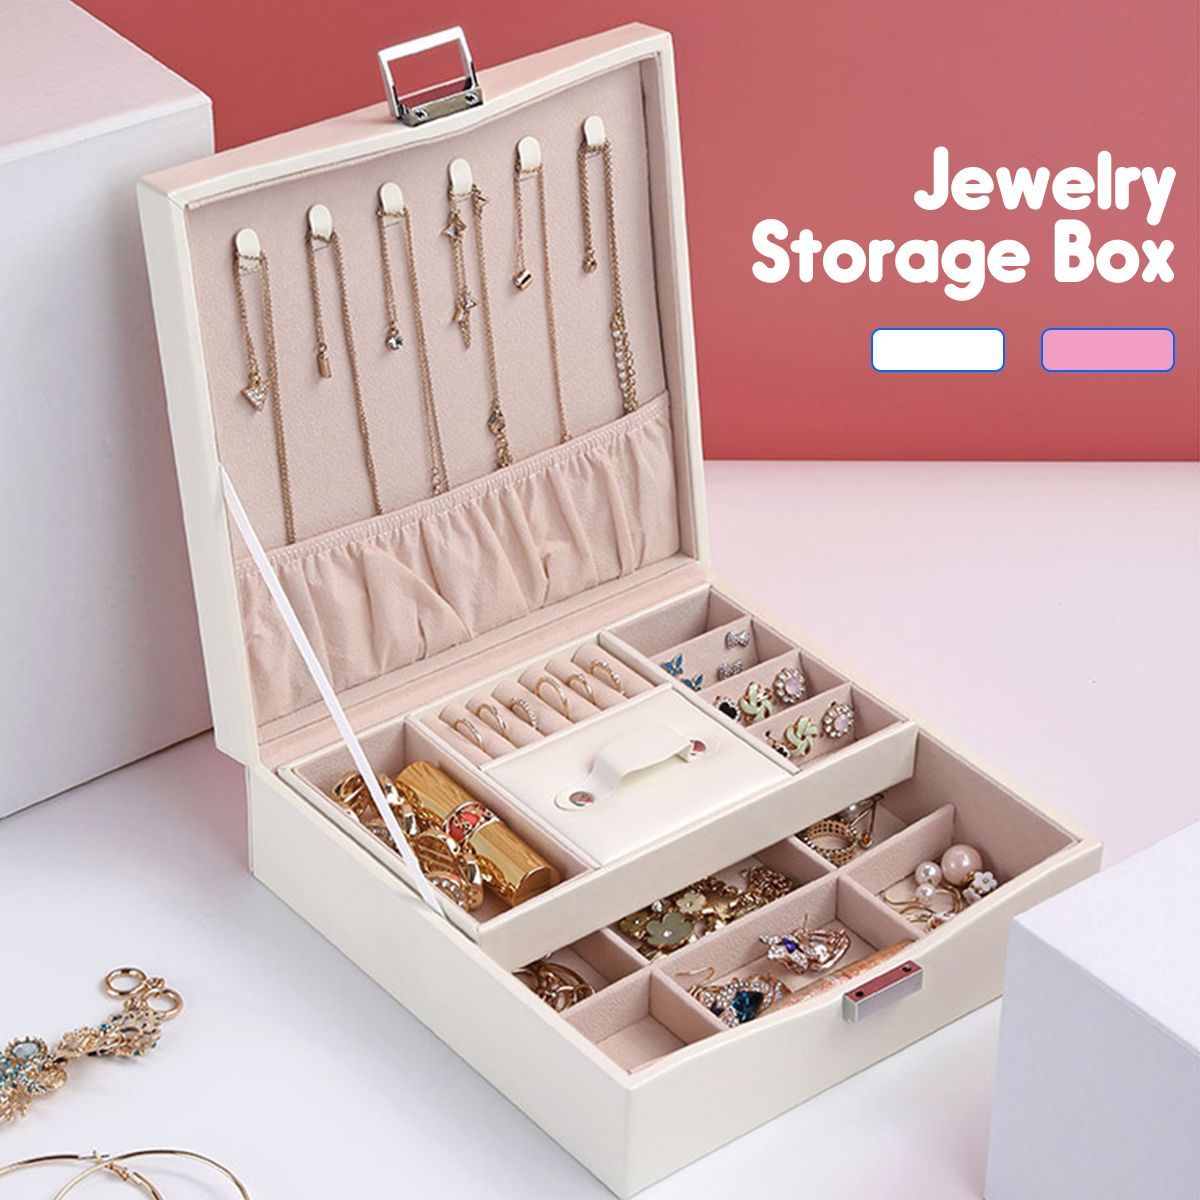 Flannel-Square-Jewelry-Box-Simple-Layout-2-Layers-Makeup-Organizer-Choker-Ring-Necklace-Storage-Box-1493604